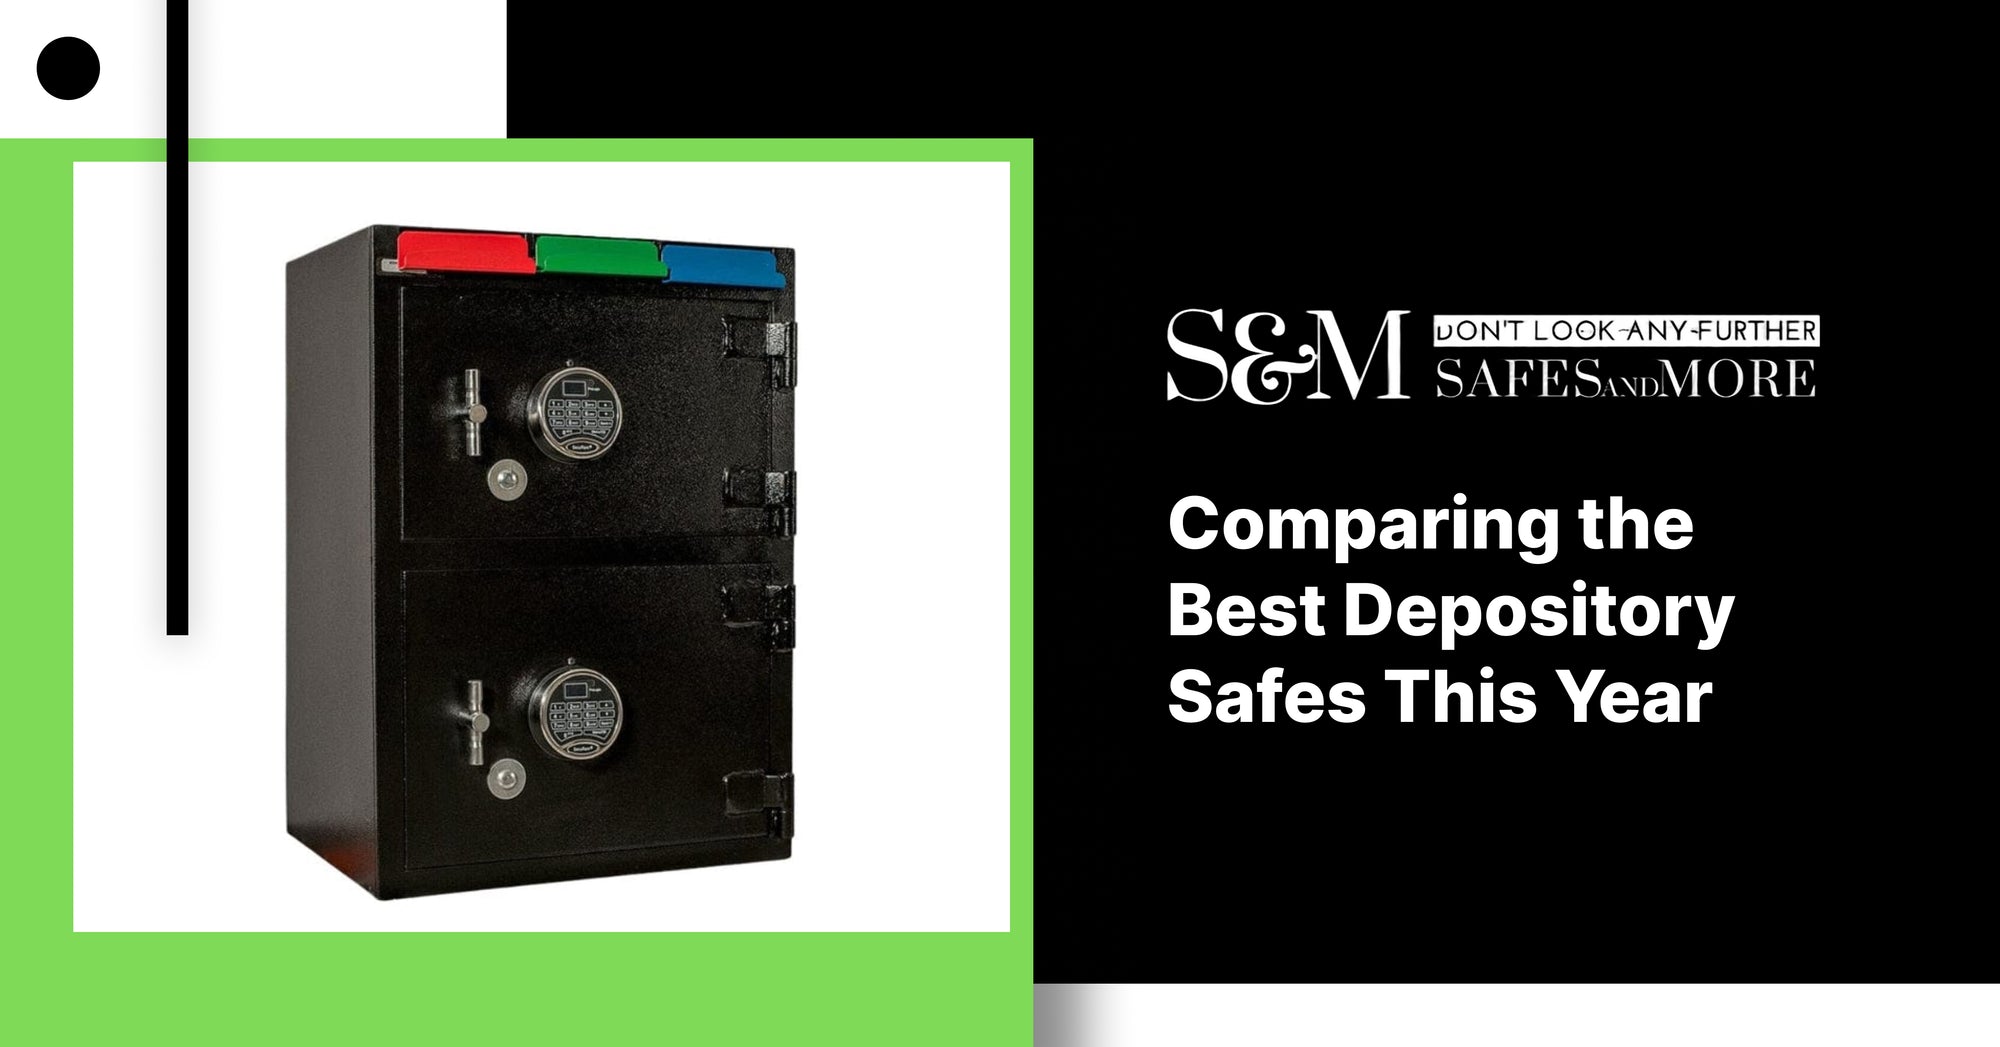 Comparing the Best Depository Safes This Year